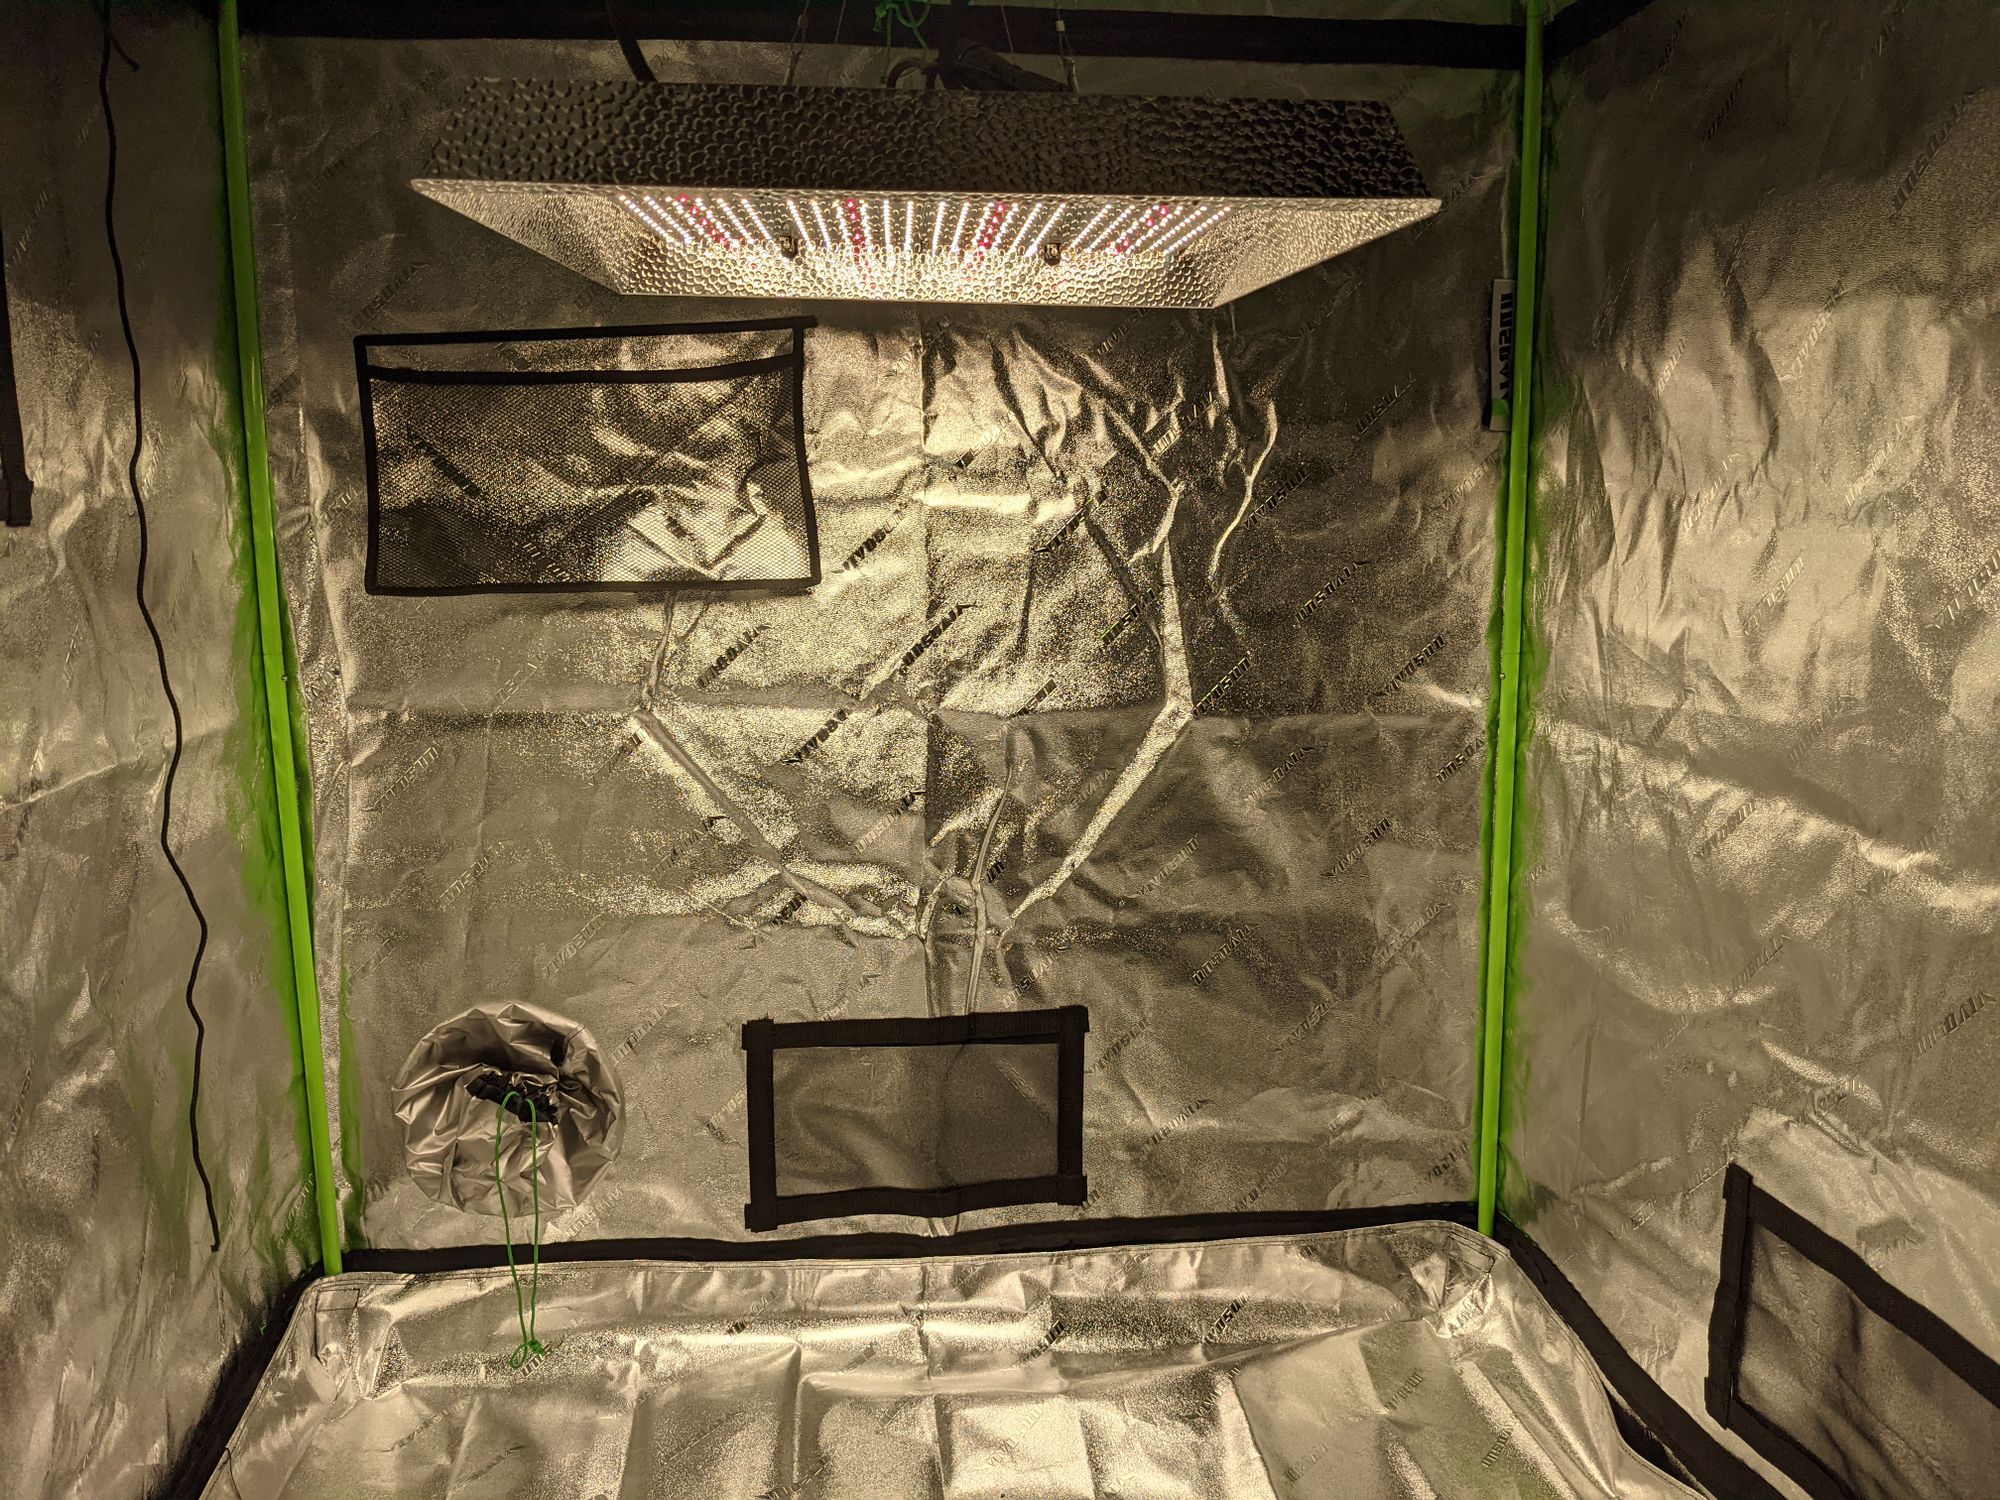 Setting Up the Grow Tent and Starting Some Seedlings